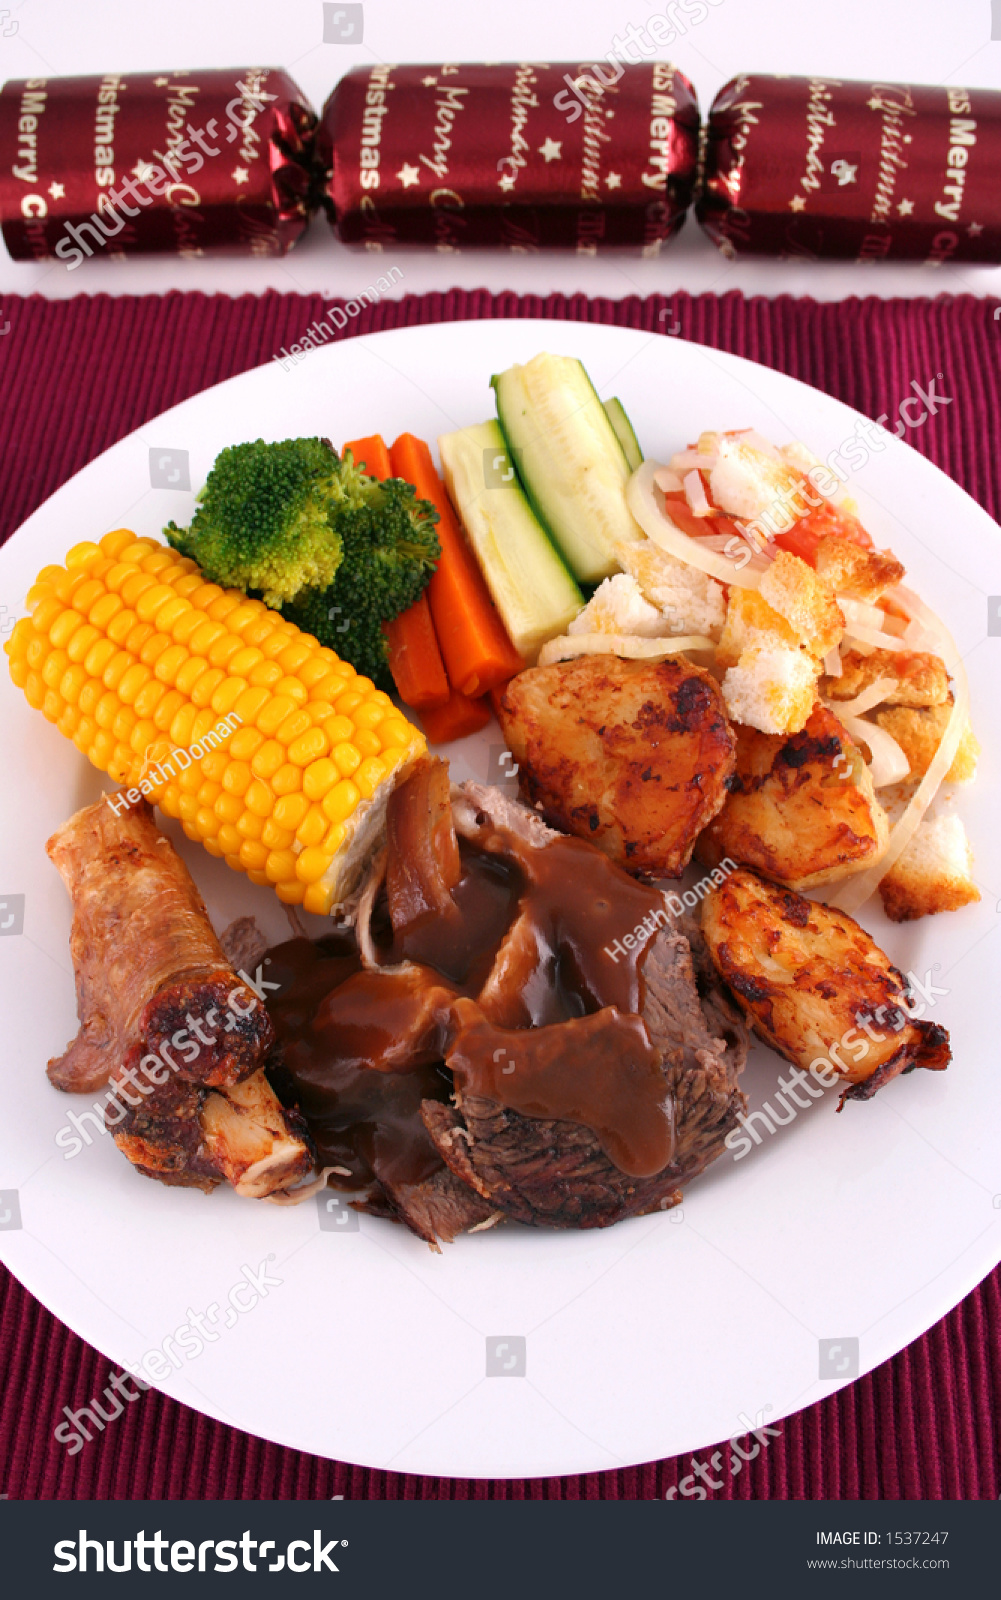 A Roast Lamb Dinner With Vegetables On A White Plate Close Up With ...